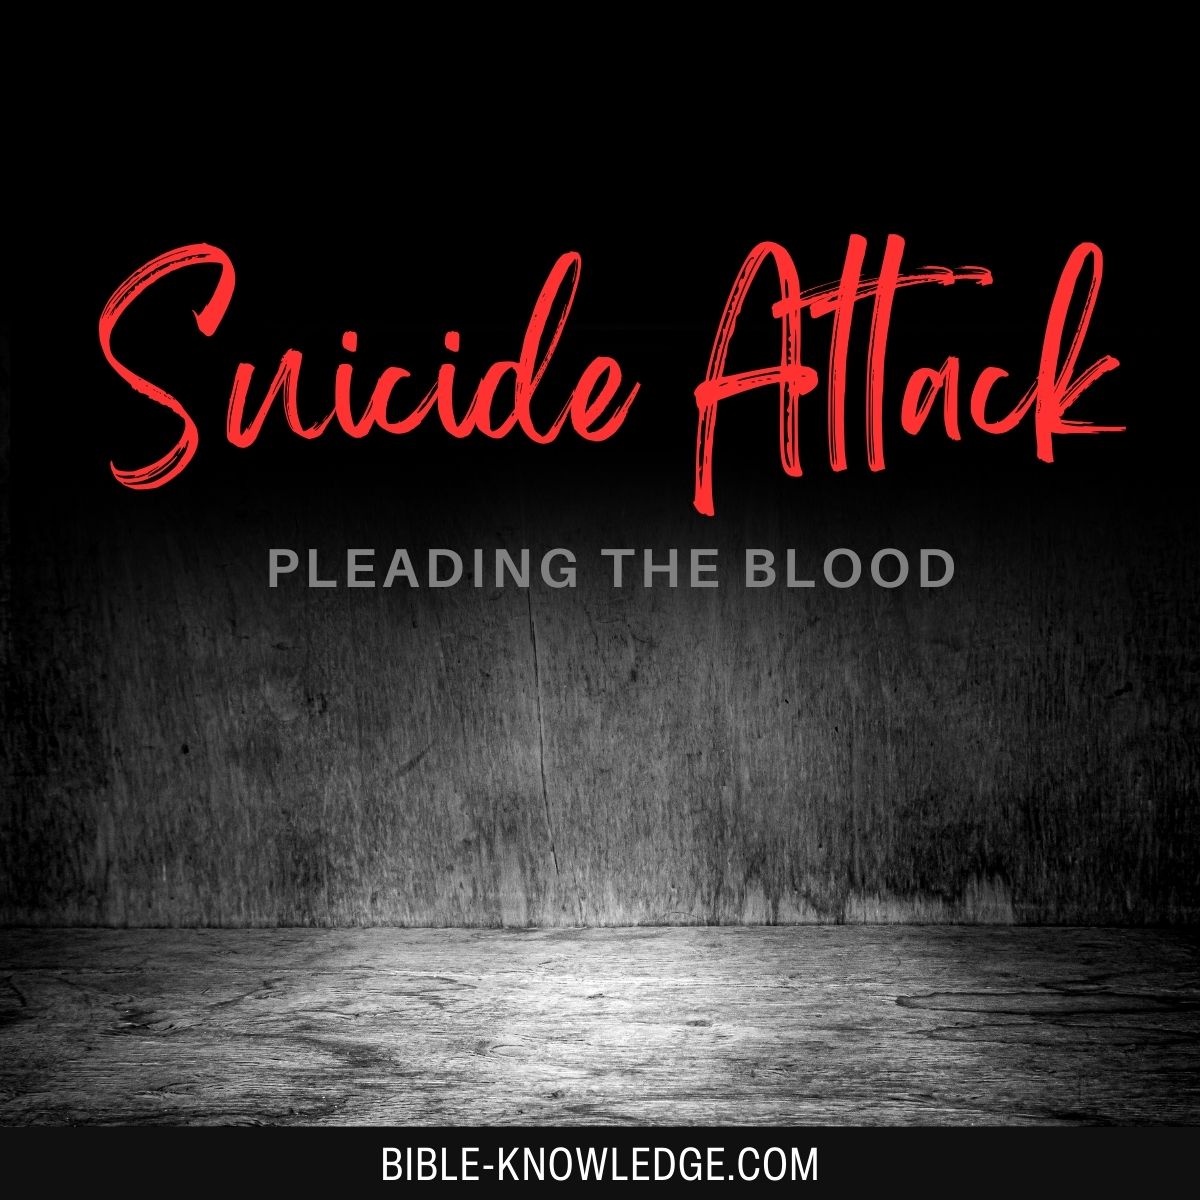 Suicide Attack - Pleading The Blood